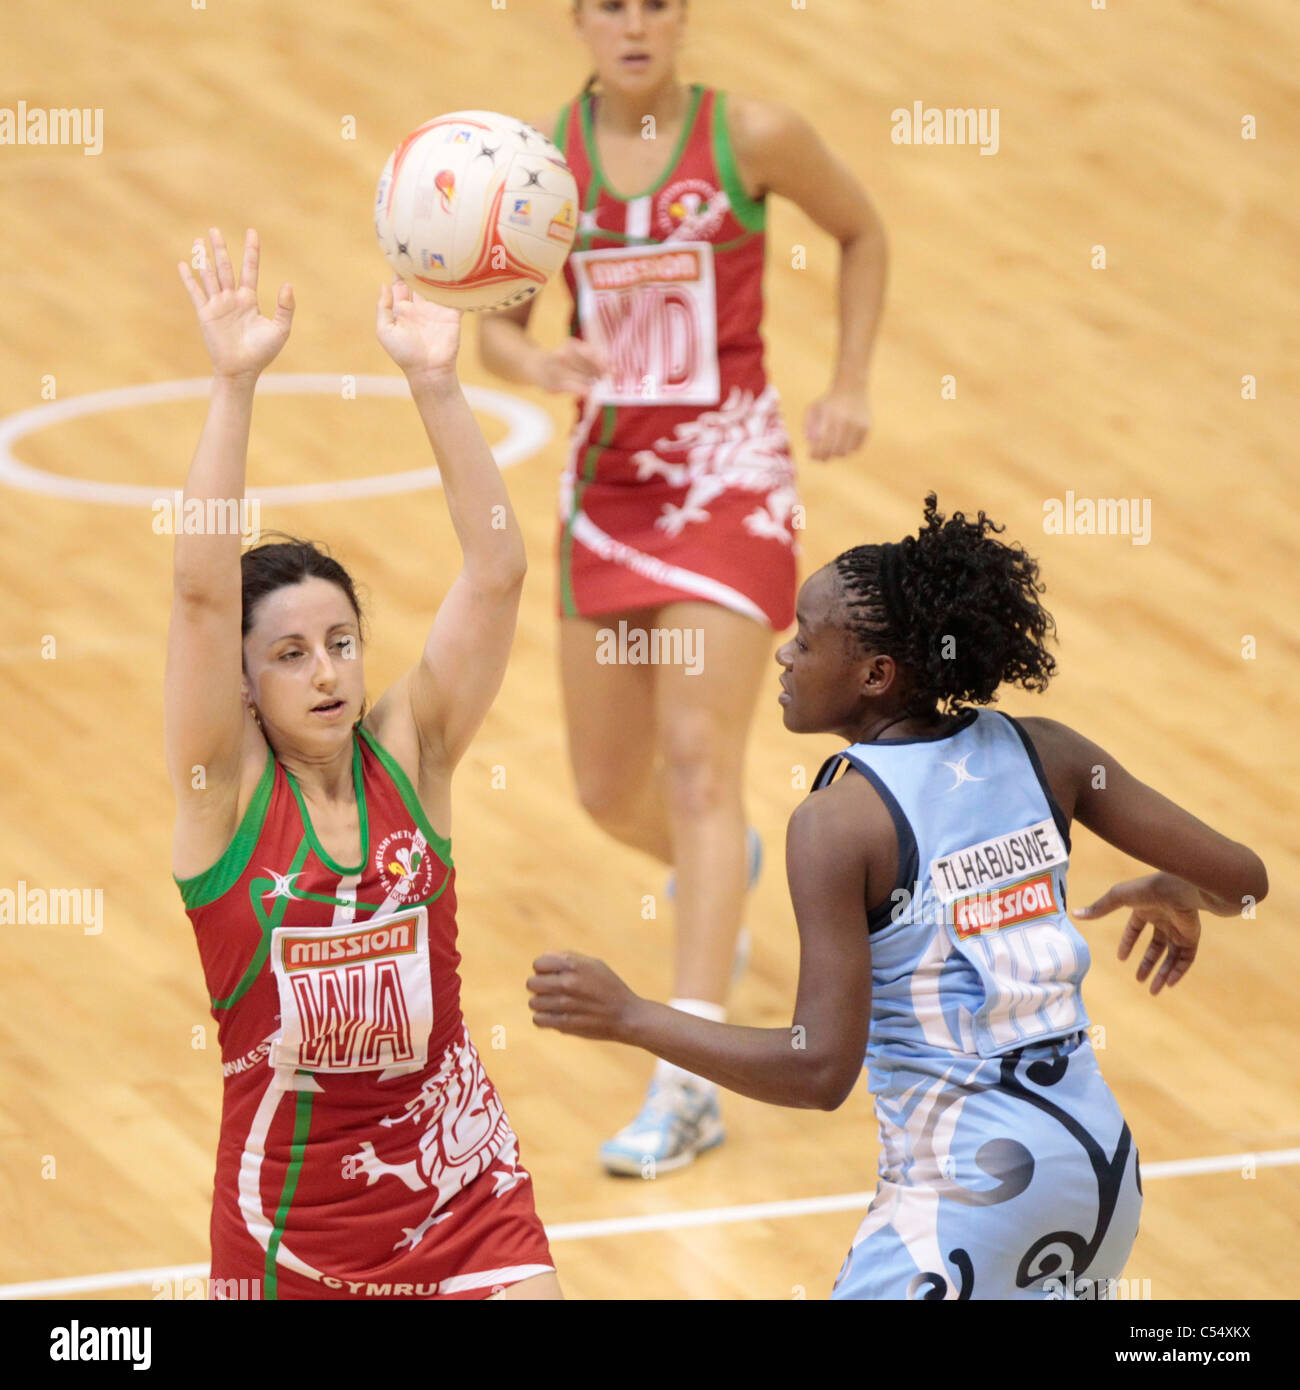 07.07.2011 Suzanne Drane of Wales(left) makes a pass over Tshegofatso Tlhabuswe during the 9-16 position playoffs between Botswana and Wales, Mission Foods World Netball Championships 2011 from the Singapore Indoor Stadium in Singapore. Stock Photo